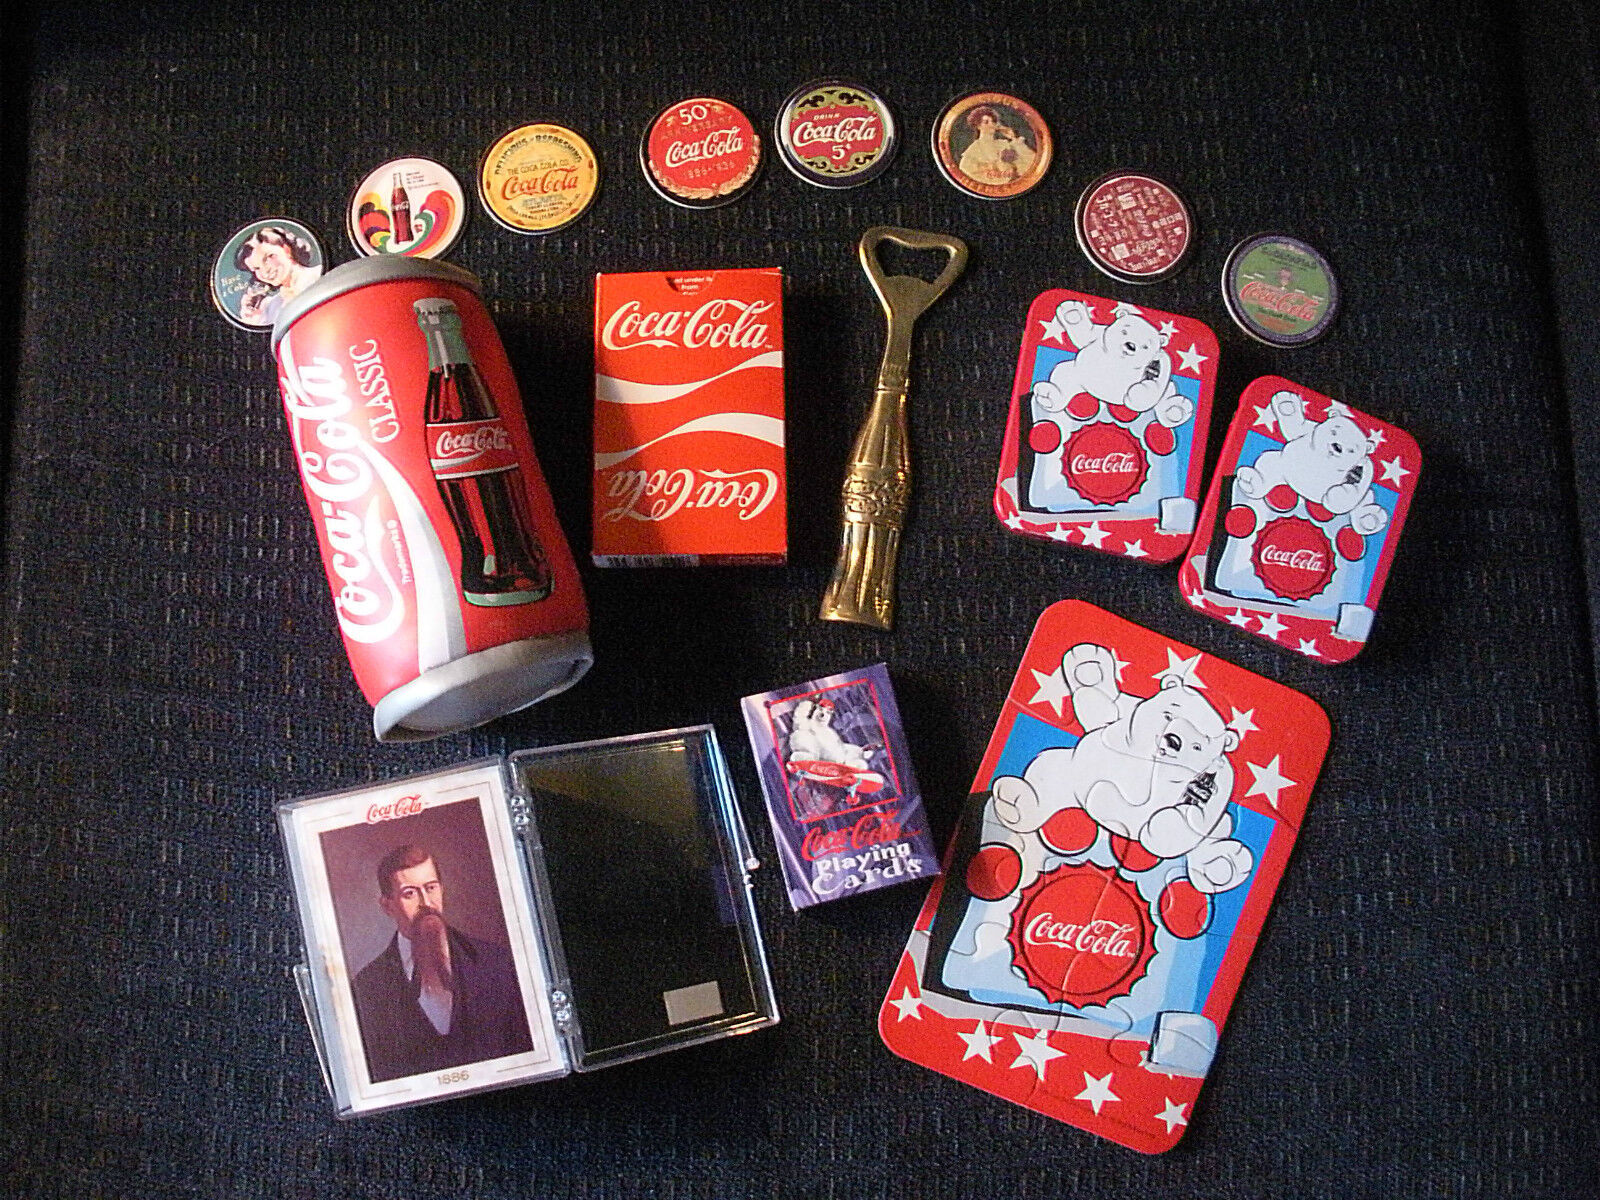 Large Collection of Coca-Cola Memorabilia (over 75 items--see multiple pictures)